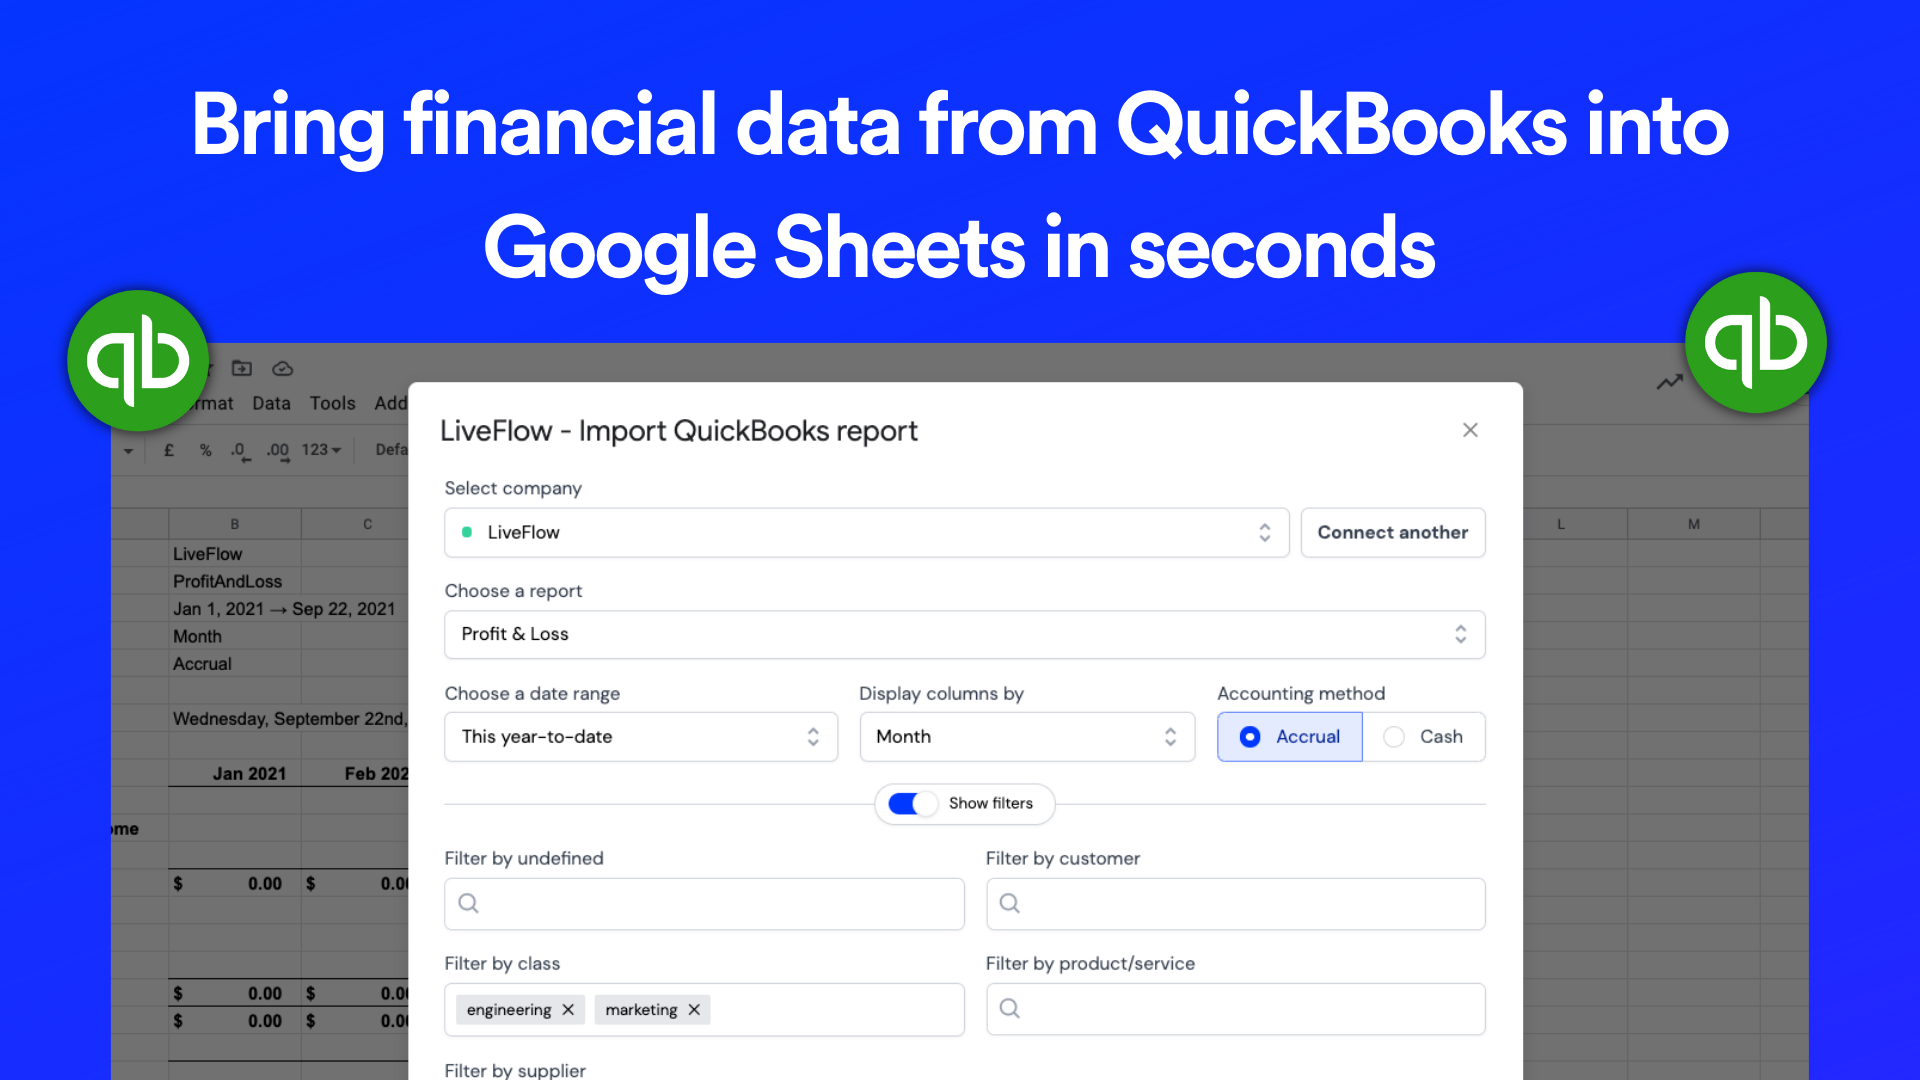 Bring financial data from QuickBooks into Google Sheets in seconds